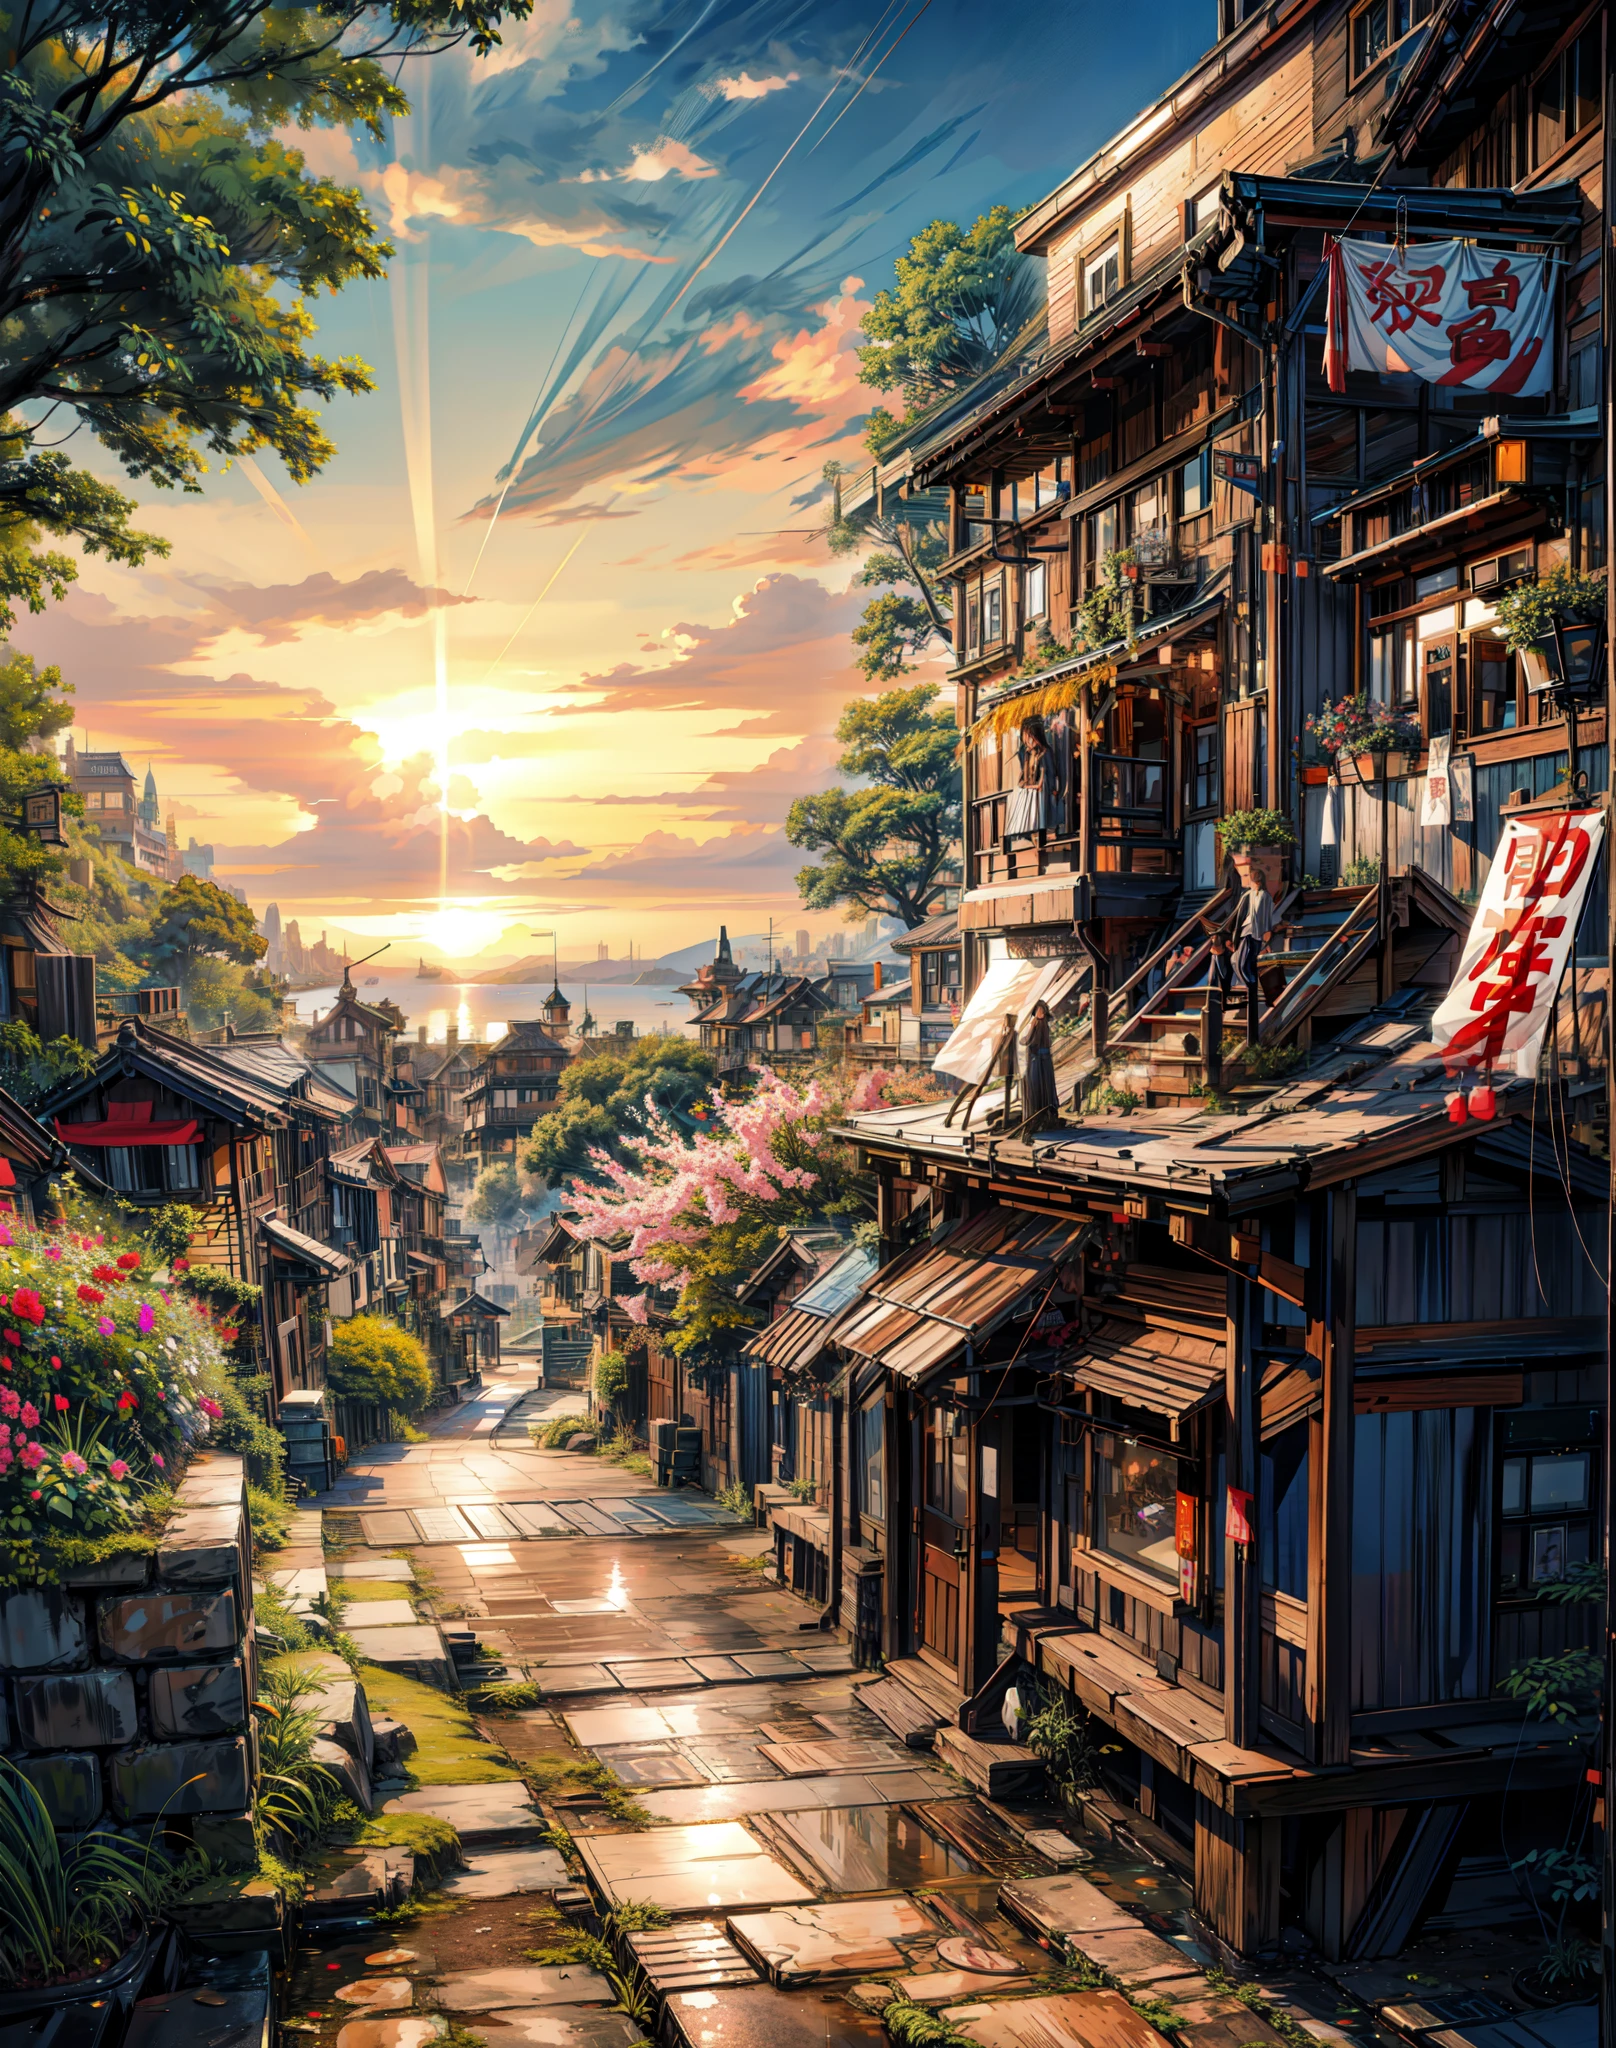 picture of an old street stall, Ghibli , beautiful landscape ,Sunlight,((Brilliant appearance)),Ghibli style, HD, hiquality, water reflection, Bushes,4k HD, Cloud,beautiful art uHD 4 k, beautiful illustration, beautiful digital painting, highly detailed digital painting, beautiful digital artwork, detailed painting 4 k, very detailed digital painting, Rich pictorial colors, gorgeous digital painting